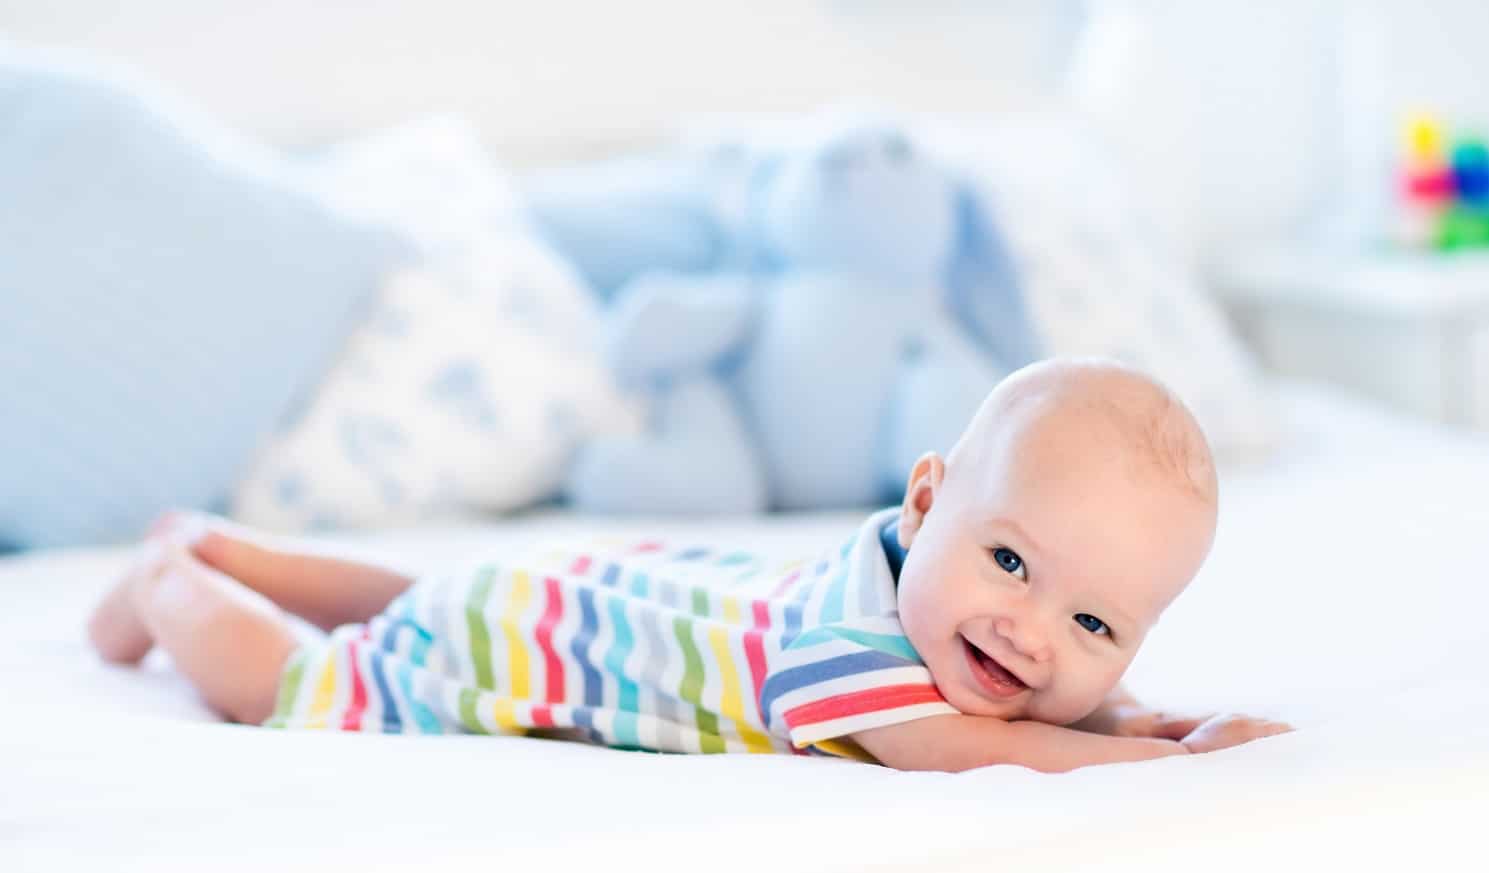 know the interesting reasons of babies smile during sleep - Name groups by origin